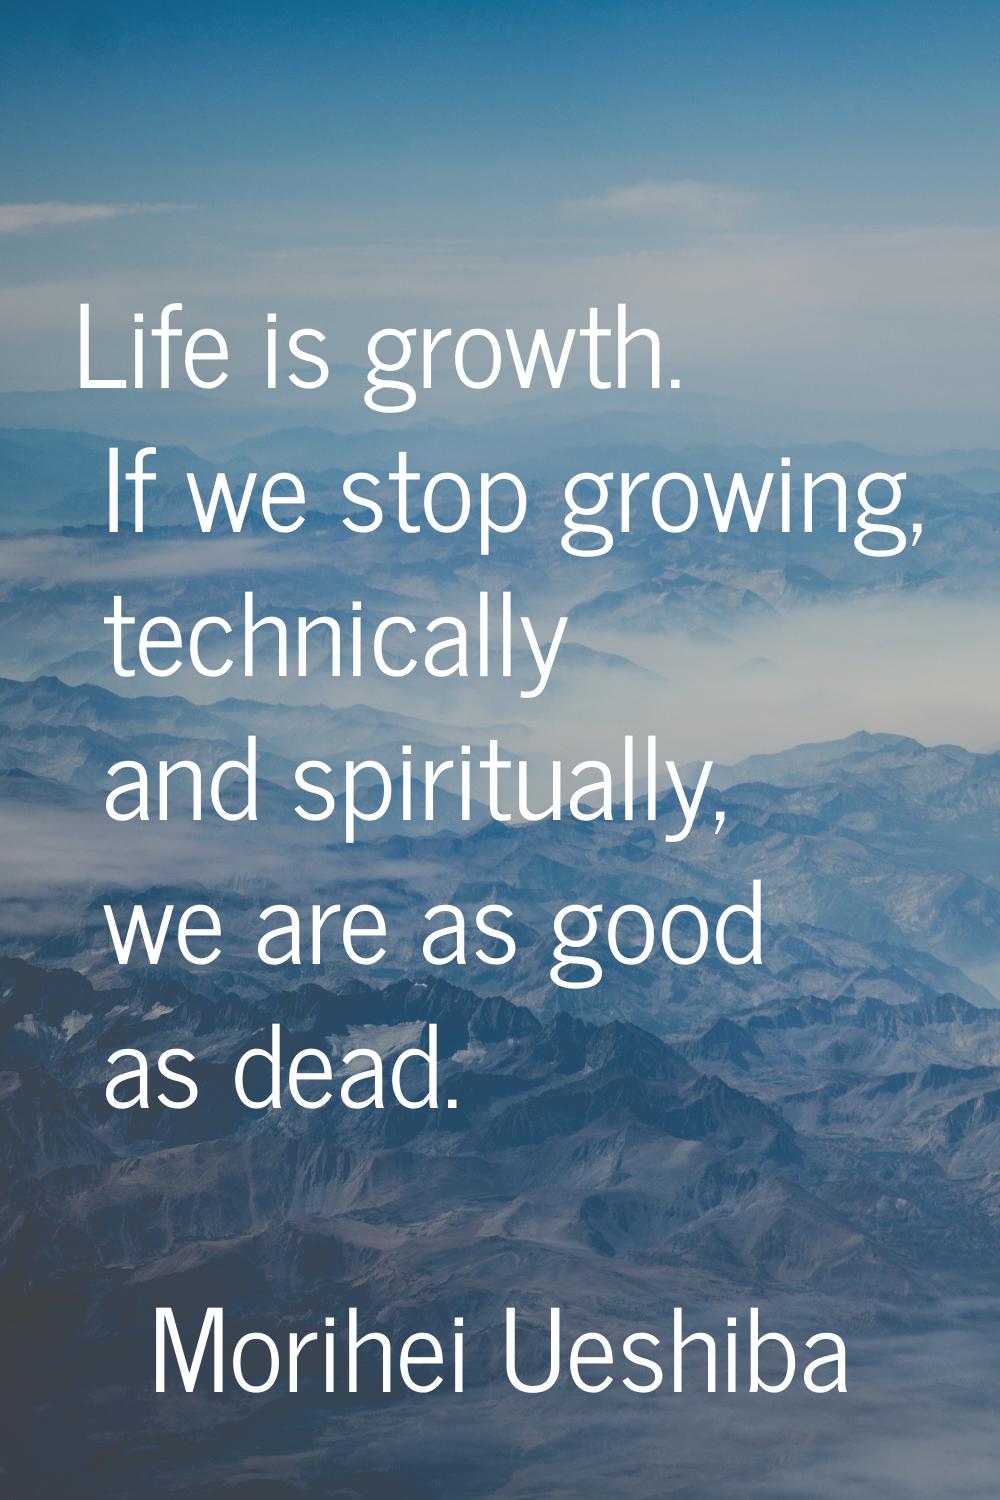 Life is growth. If we stop growing, technically and spiritually, we are as good as dead.